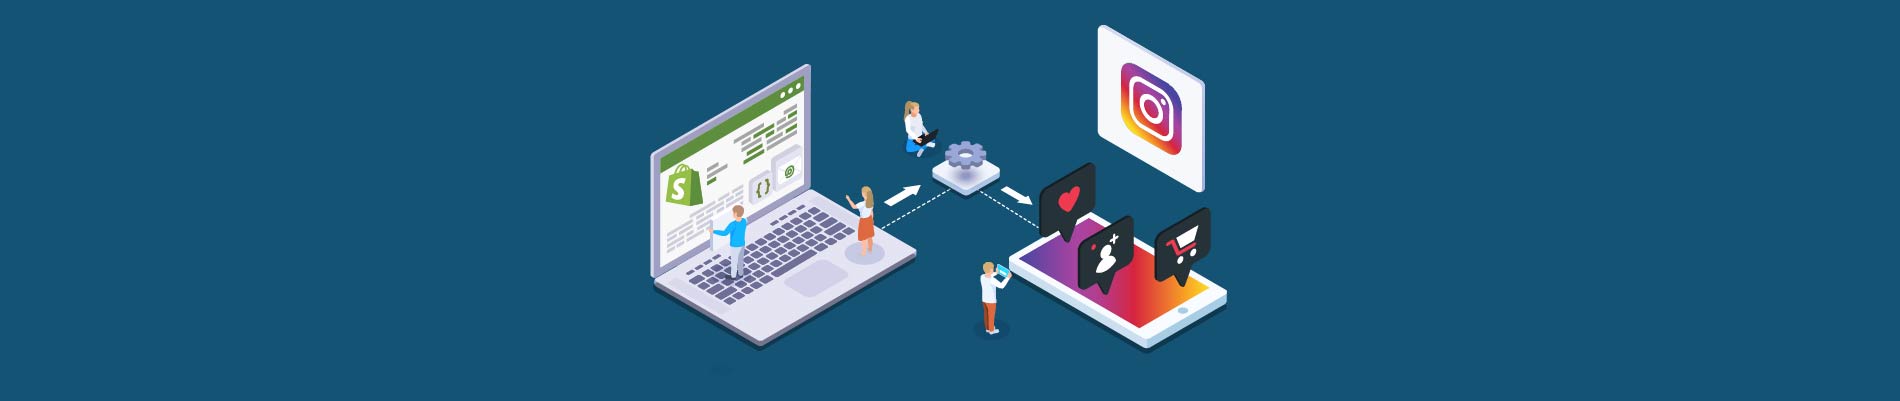 connect shopify instagram